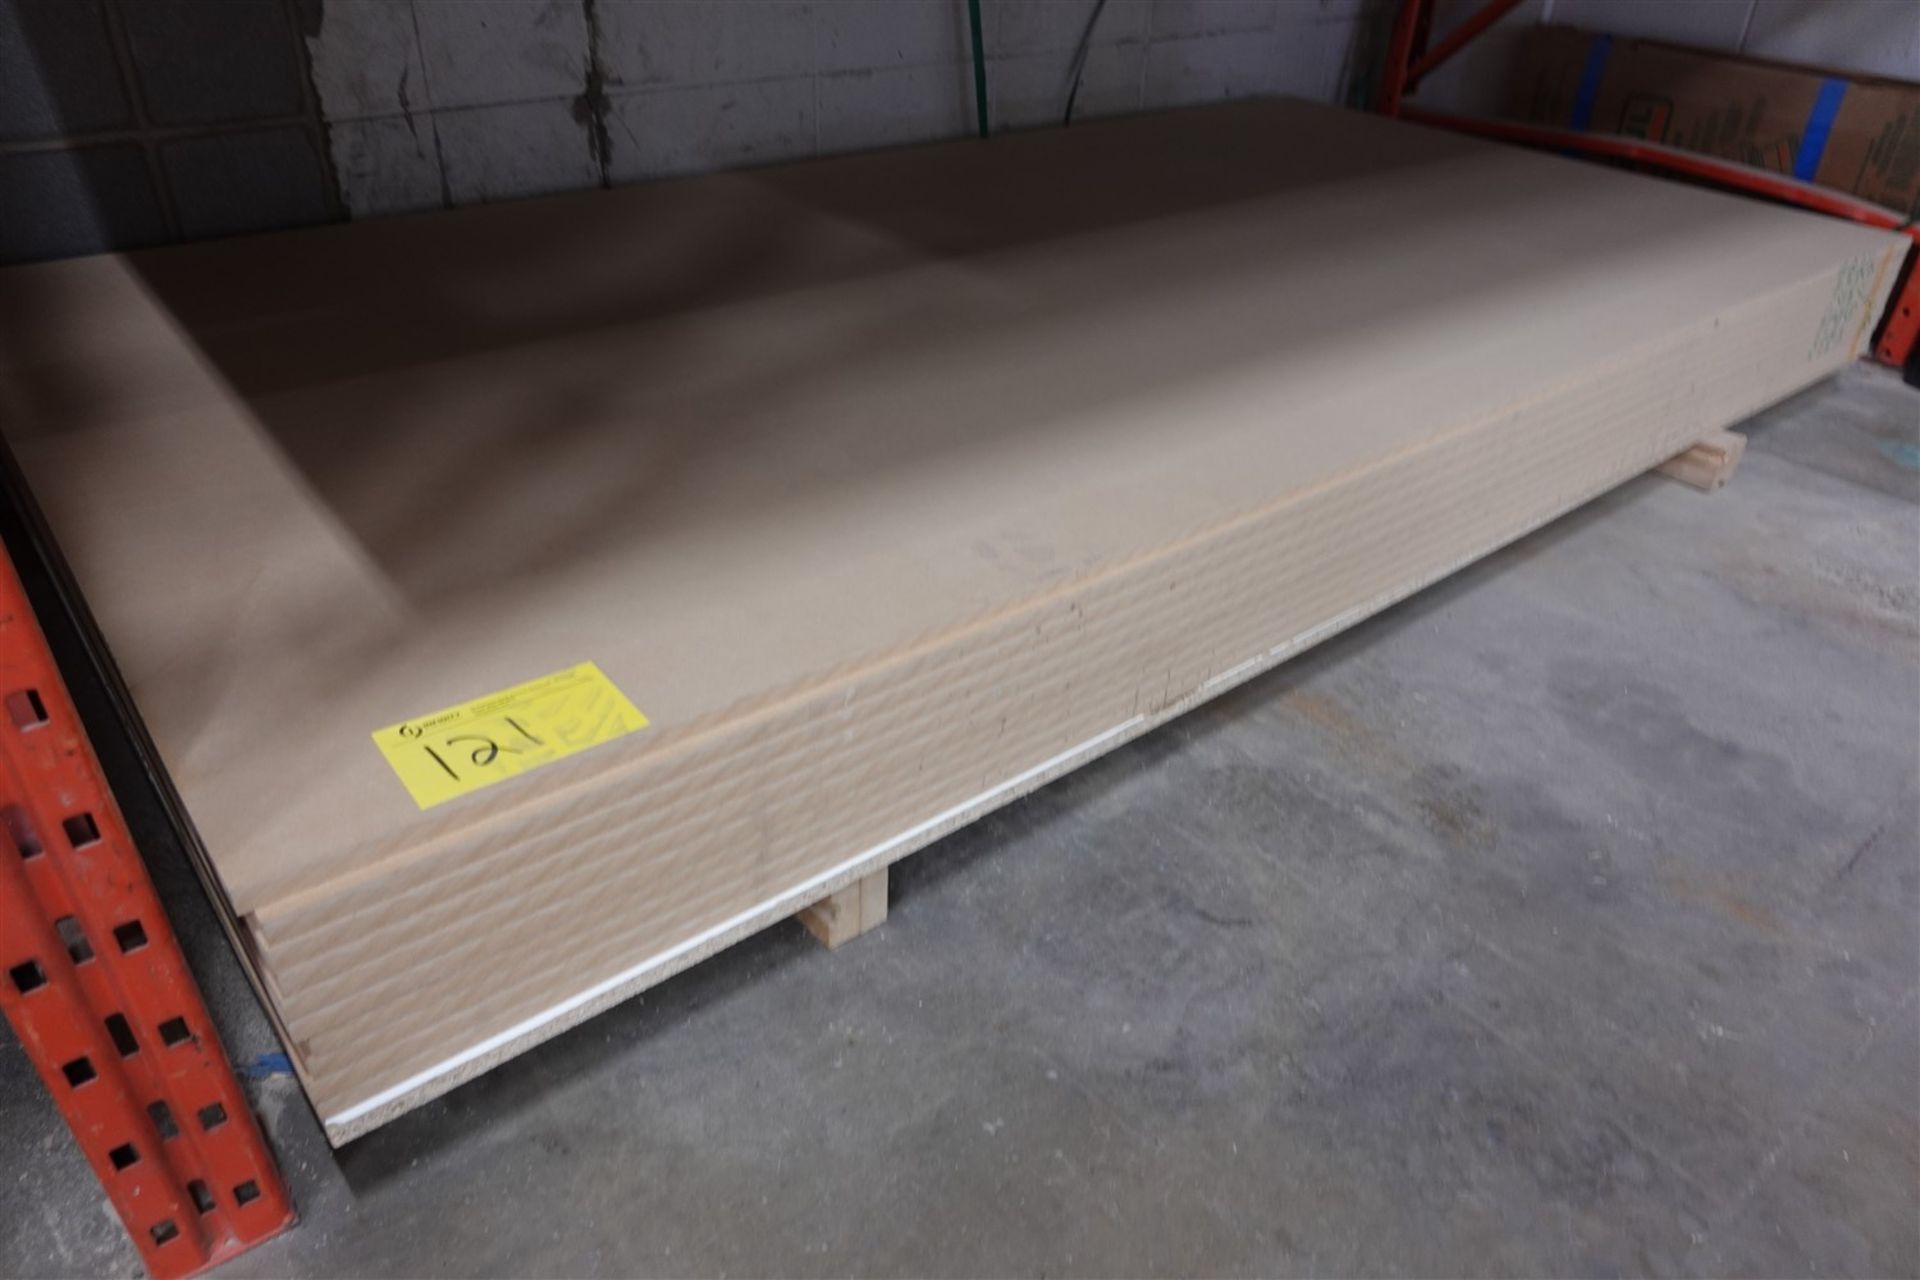 10 SHEETS OF 4’ X 8’ X ¾” MDF W/ NO FINISH